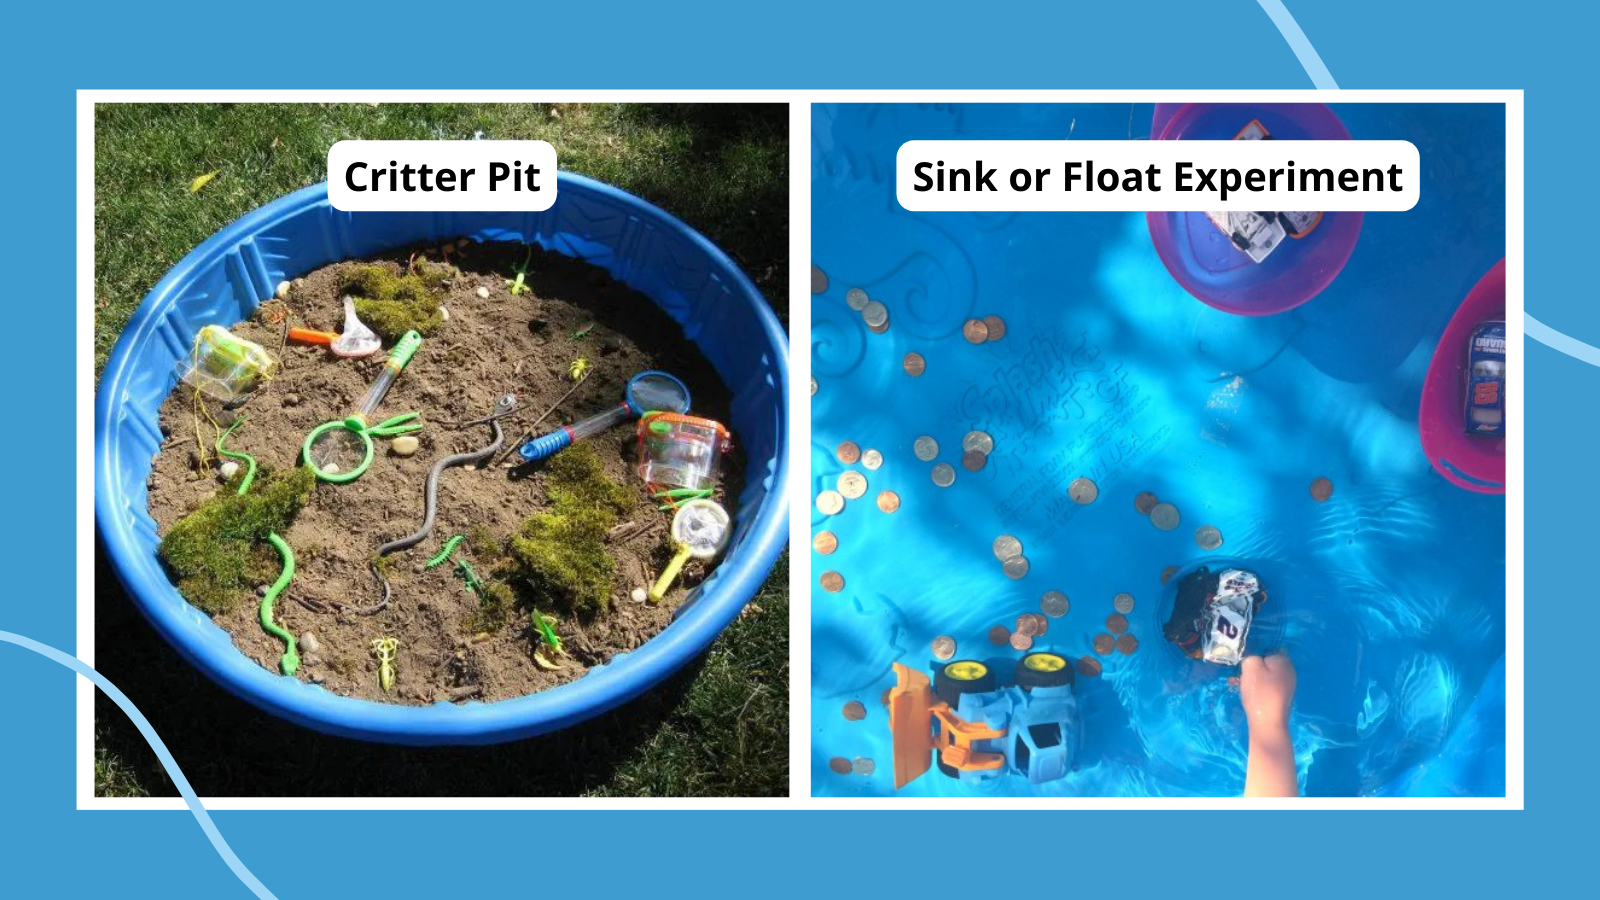 Examples of kiddie pool games including a pool make into a critter pit with sand and a sink or float experiment in a pool.